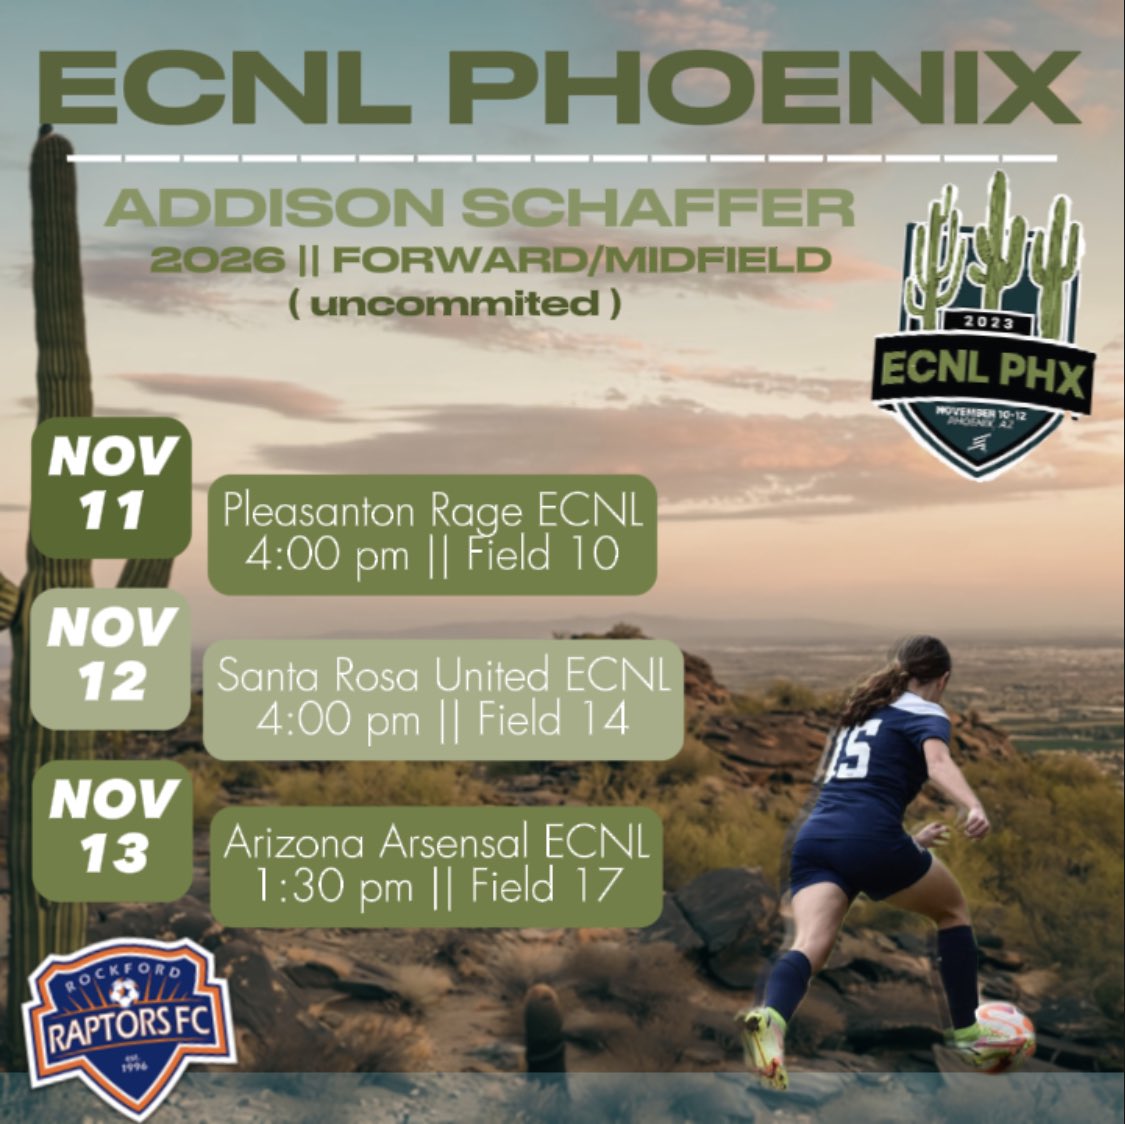 Come check out one of my games in the Phoenix, Arizona ECNL Showcase! Schedule displayed below @ecnlgirls @theecnl @TopDrawerSoccer @imyouthsoccer @RRaptorsfc